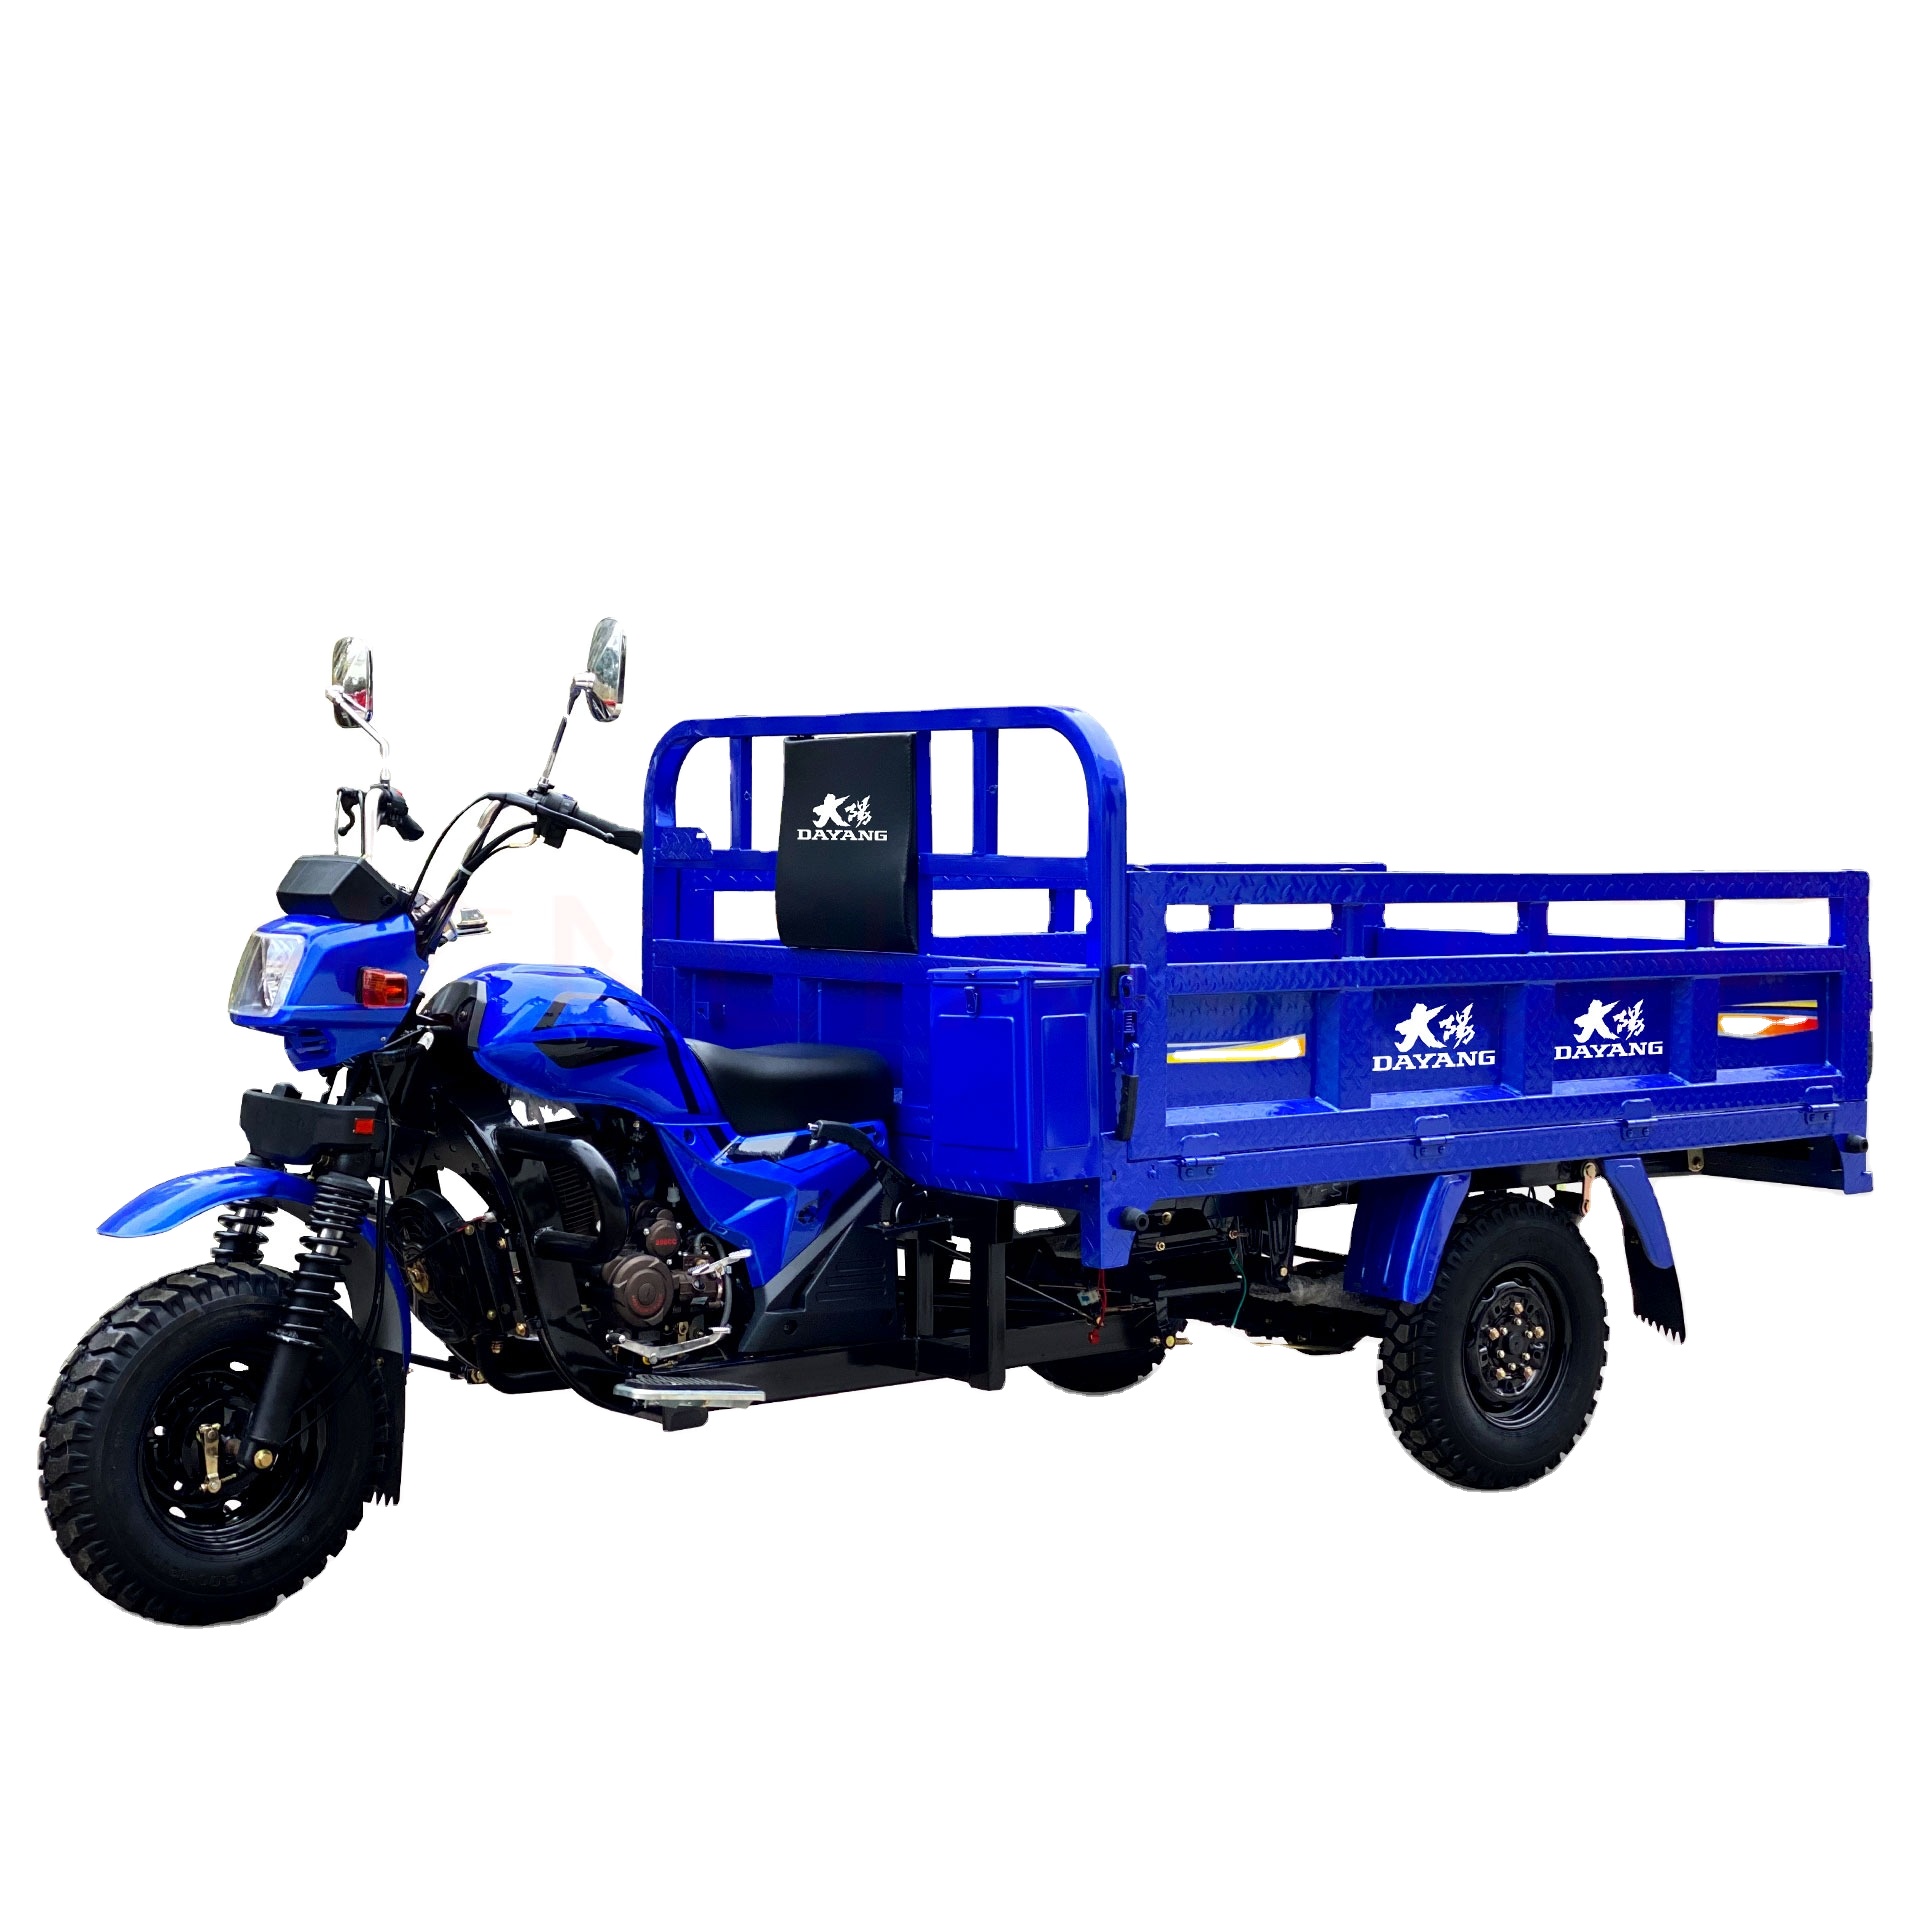 High Quality 200cc/250cc/300cc 3 wheels motorcycles  for Adult Car Auto Dumping Cargo Motorcycle Loader CCC Origin Type